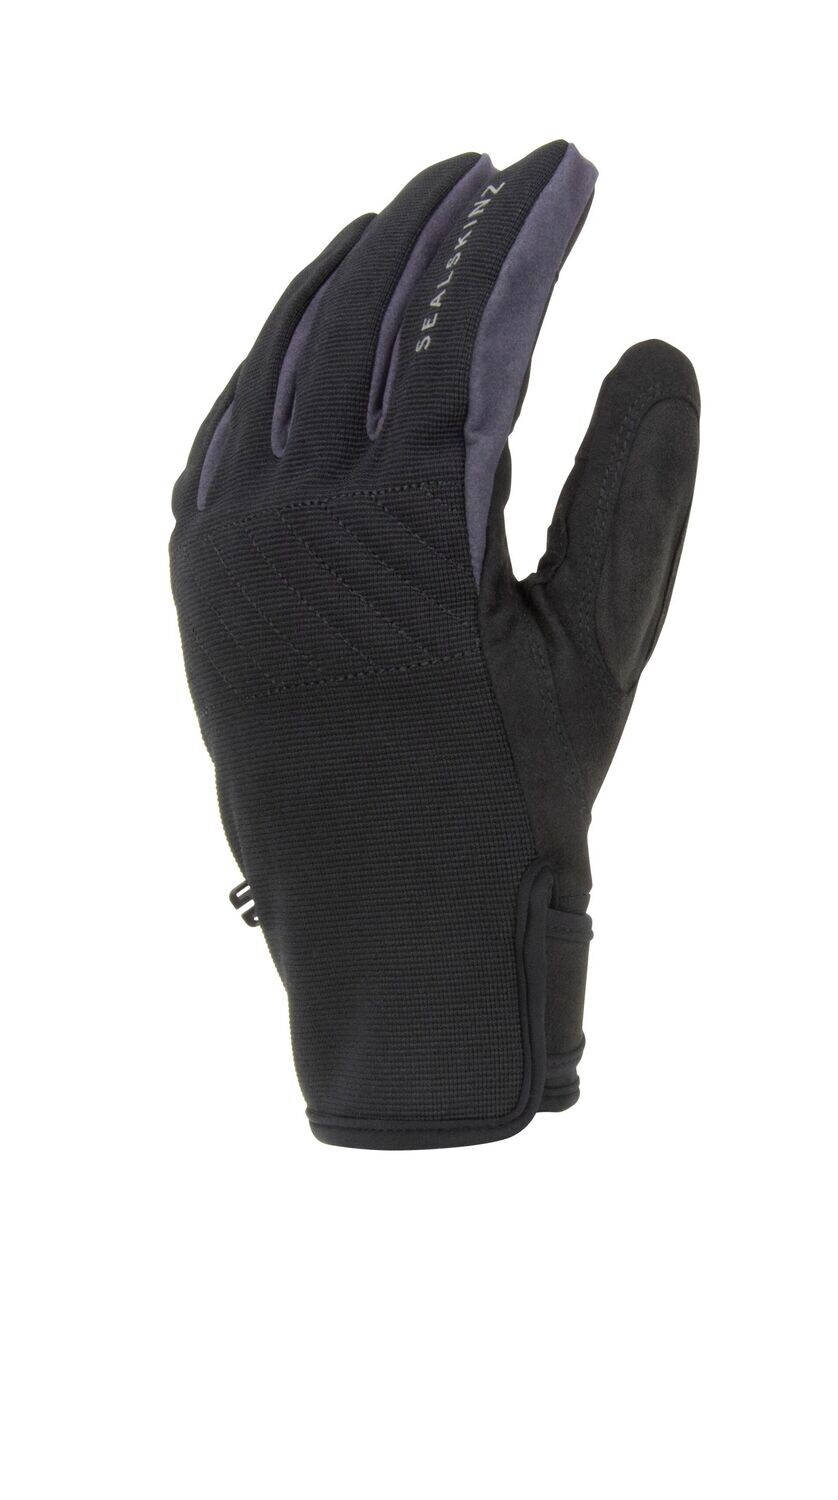 SealSkinz Waterproof All Weather Multi-Activity Glove with Fusion Control™, Größe: S (7-8), Farbe: Black/Grey